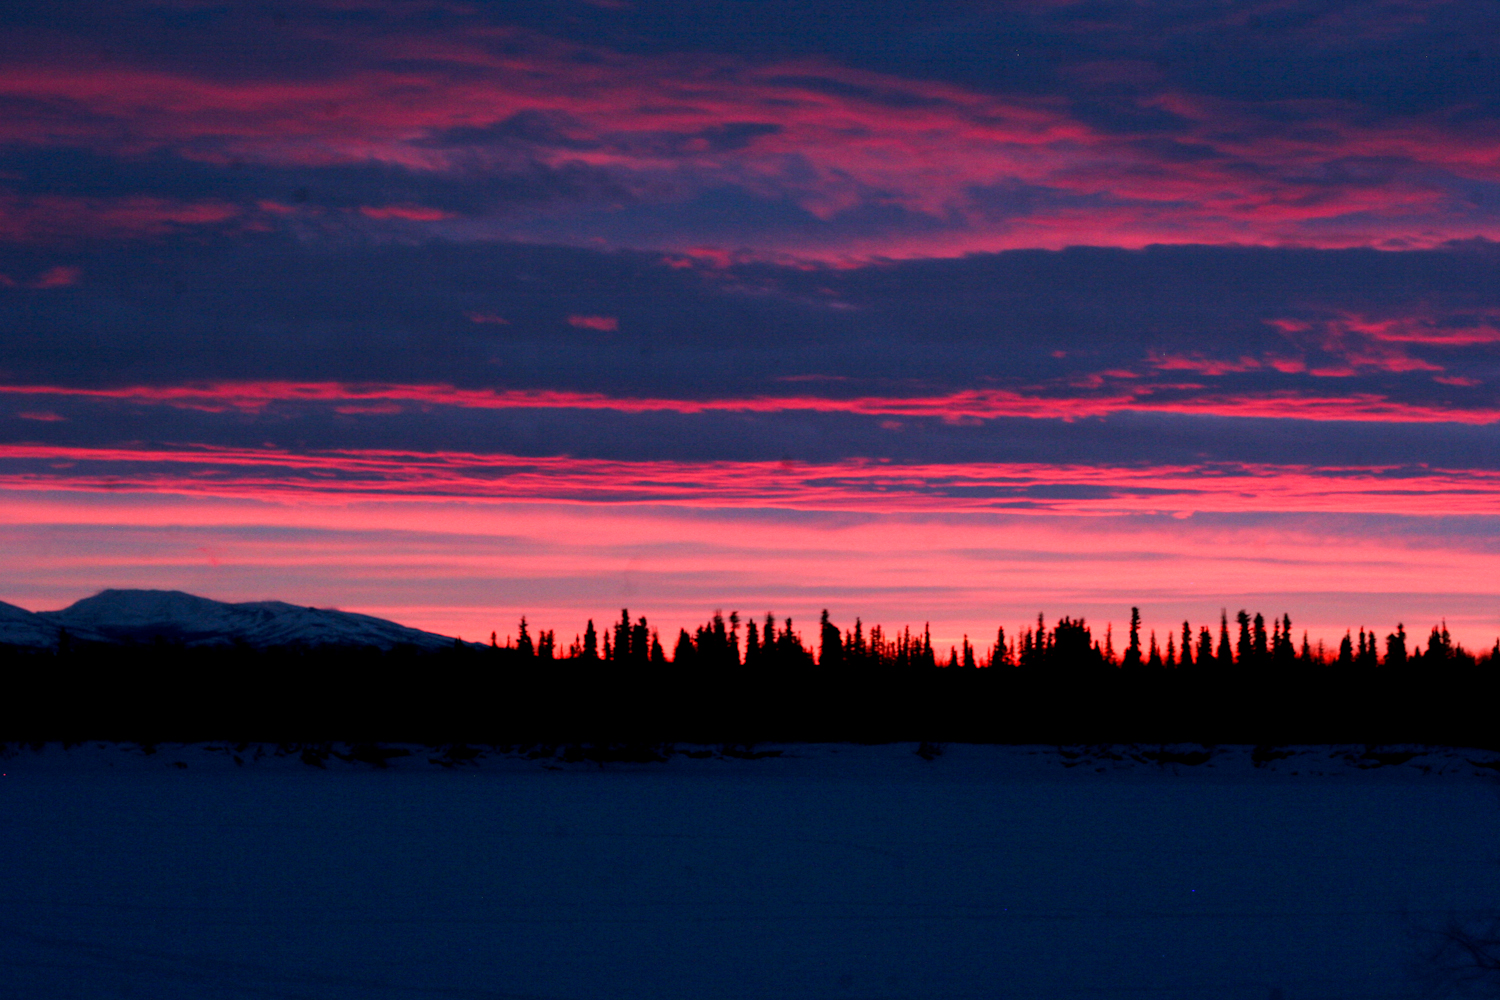   Sunrises are short and beautiful in Kobuk Valley National Park, enclosed by the Baird and Waring mountains. Inuchuck, 'Old Man Mountain' lies in the distance. The river, now frozen, is a source of life and sustenance for the villagers of Ambler who